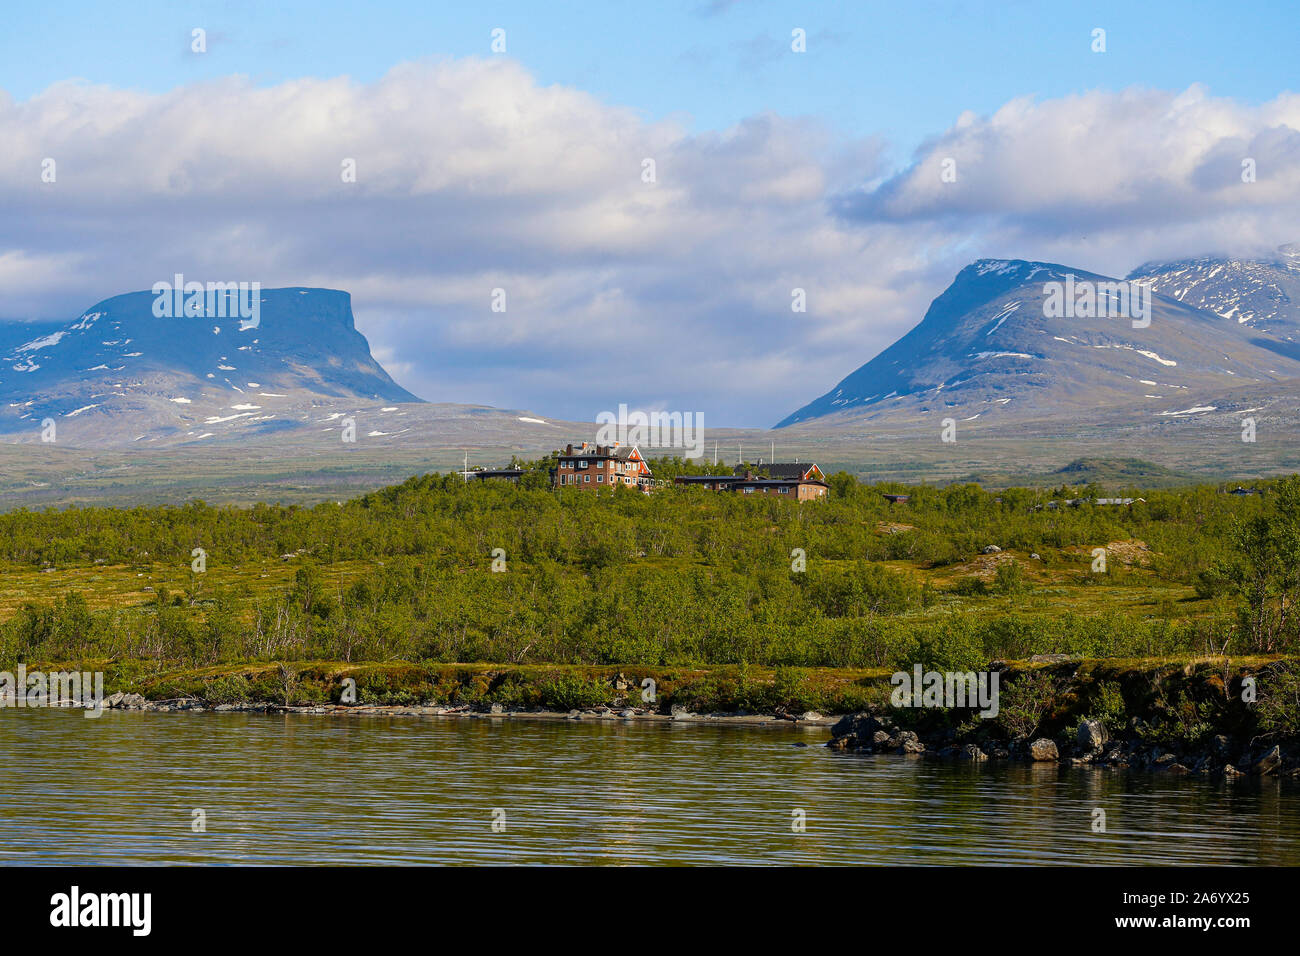 The U-shaped valley of Tjuonavagge in the Arctic region of Sweden Stock Photo